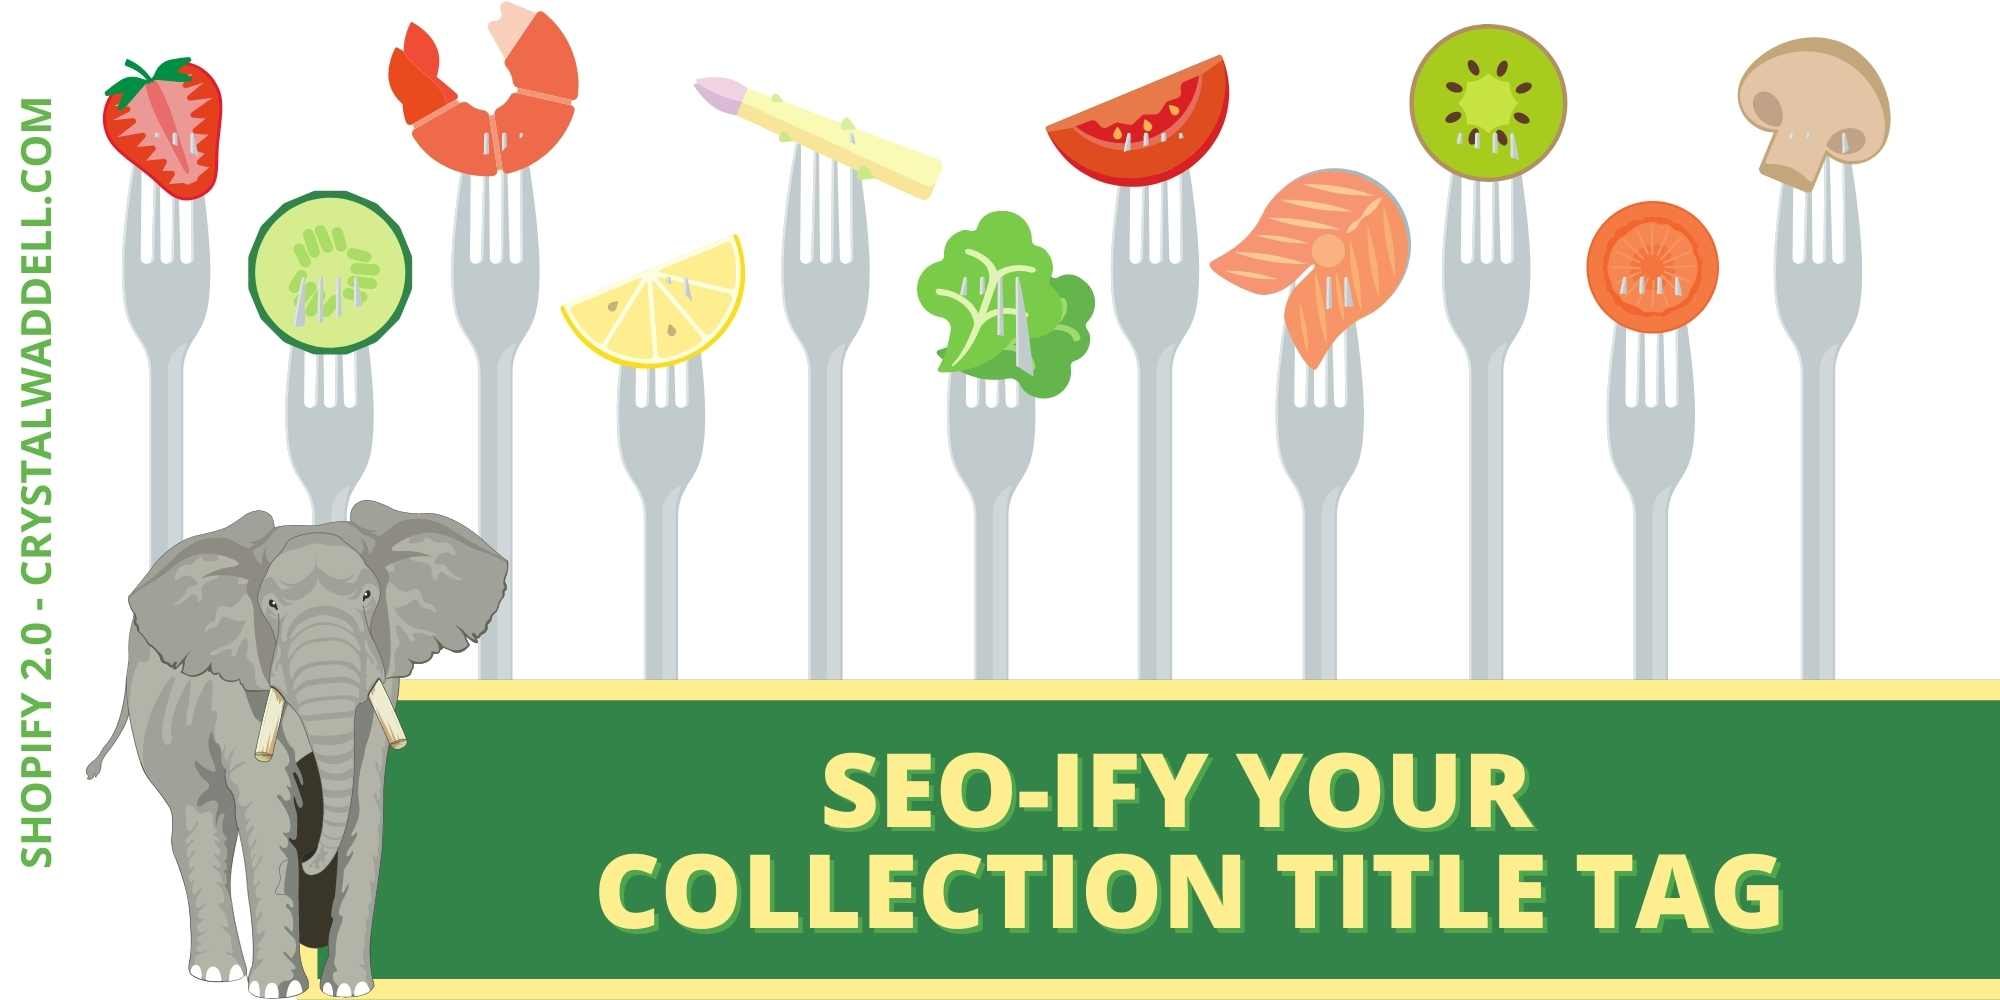 Each collection title tag should include a target keyword to maximize your category pages for search.